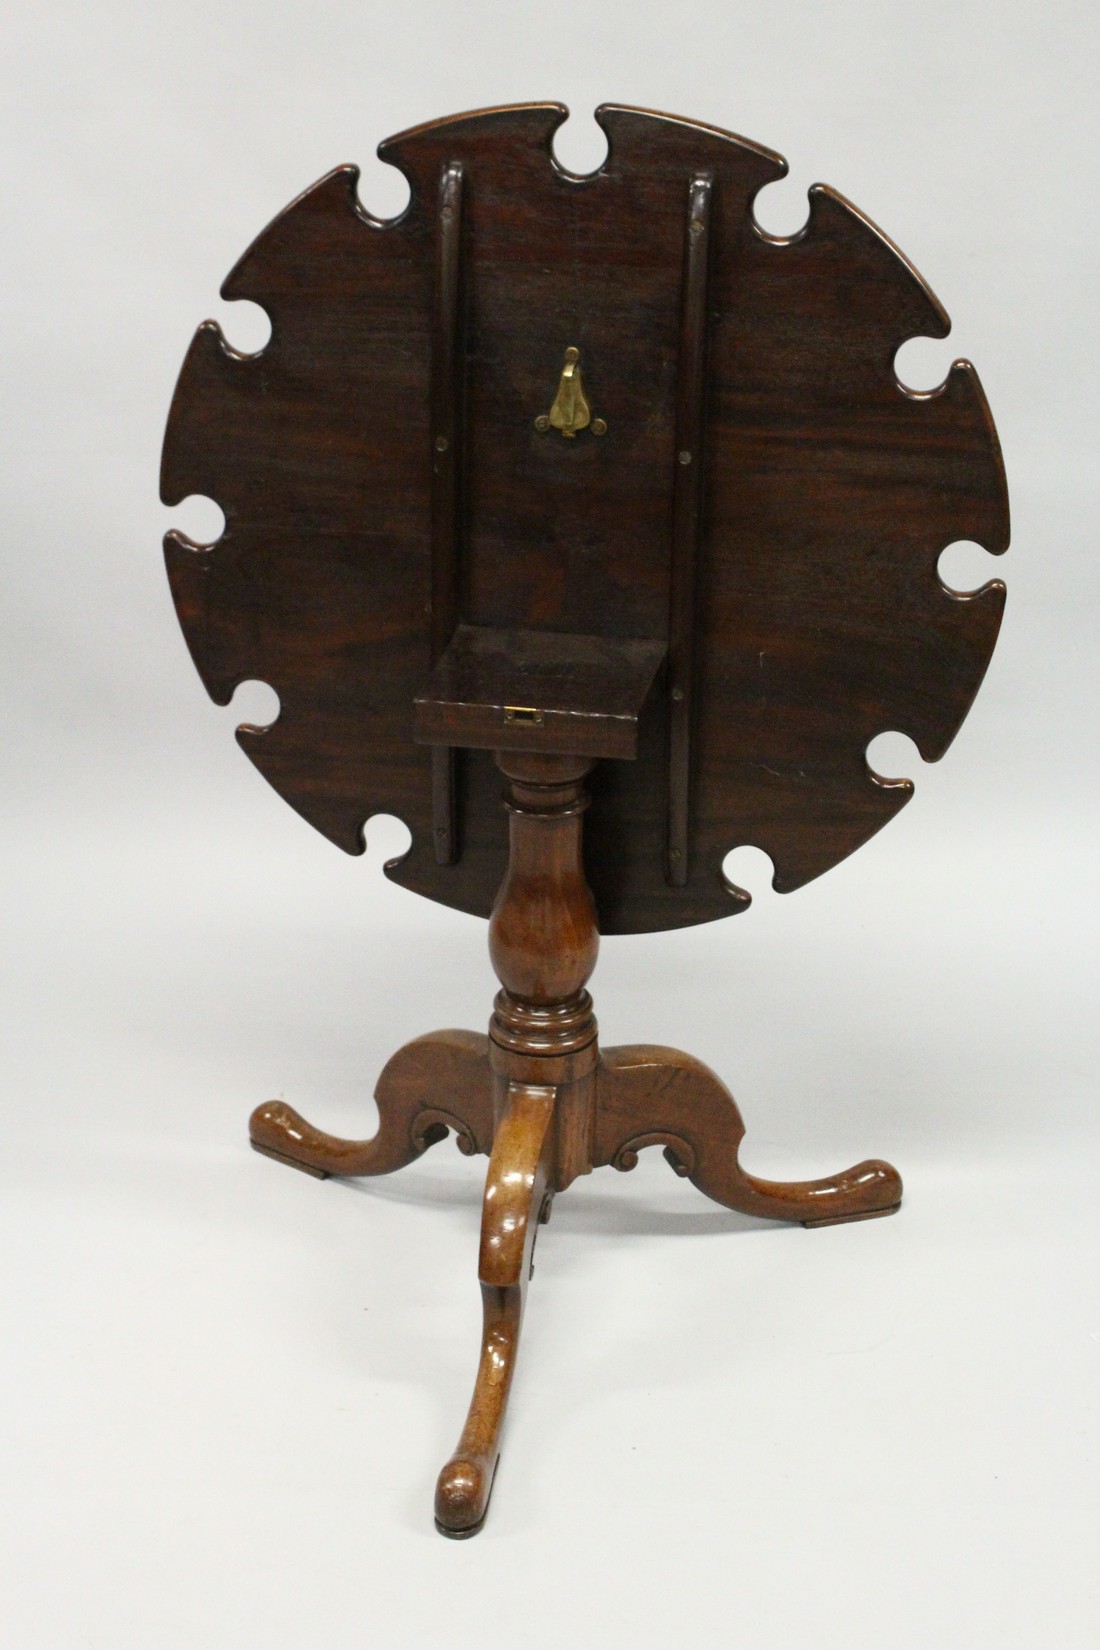 A GEORGE III STYLE MAHOGANY SHIP'S TRIPOD TABLE with centre section for bottles. The sides with - Image 5 of 6